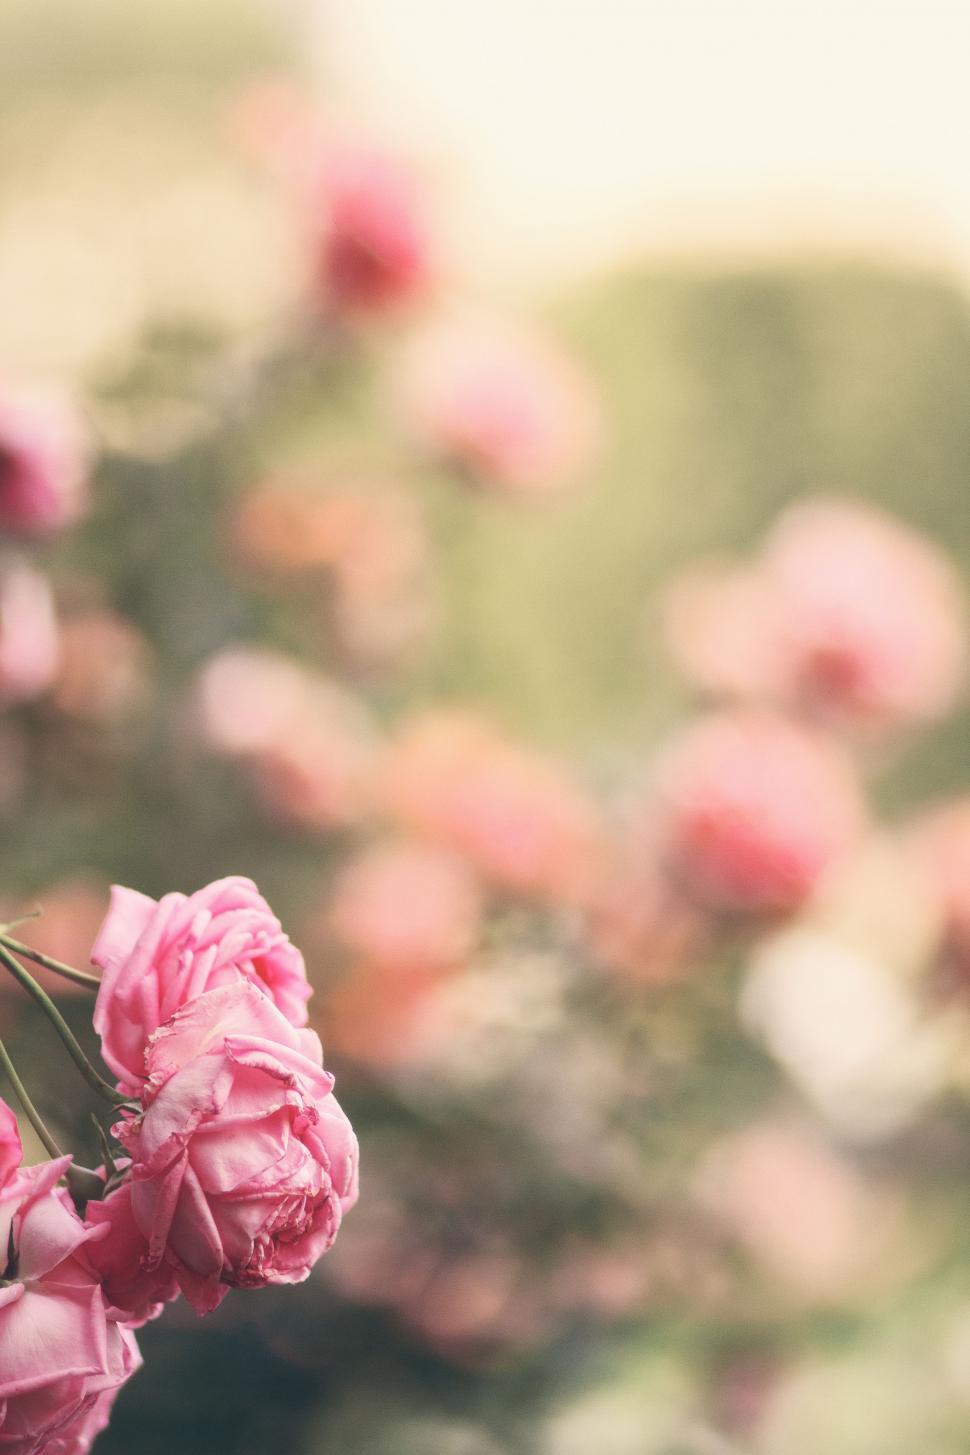 Free Image of Pink Flowers in a Vase 